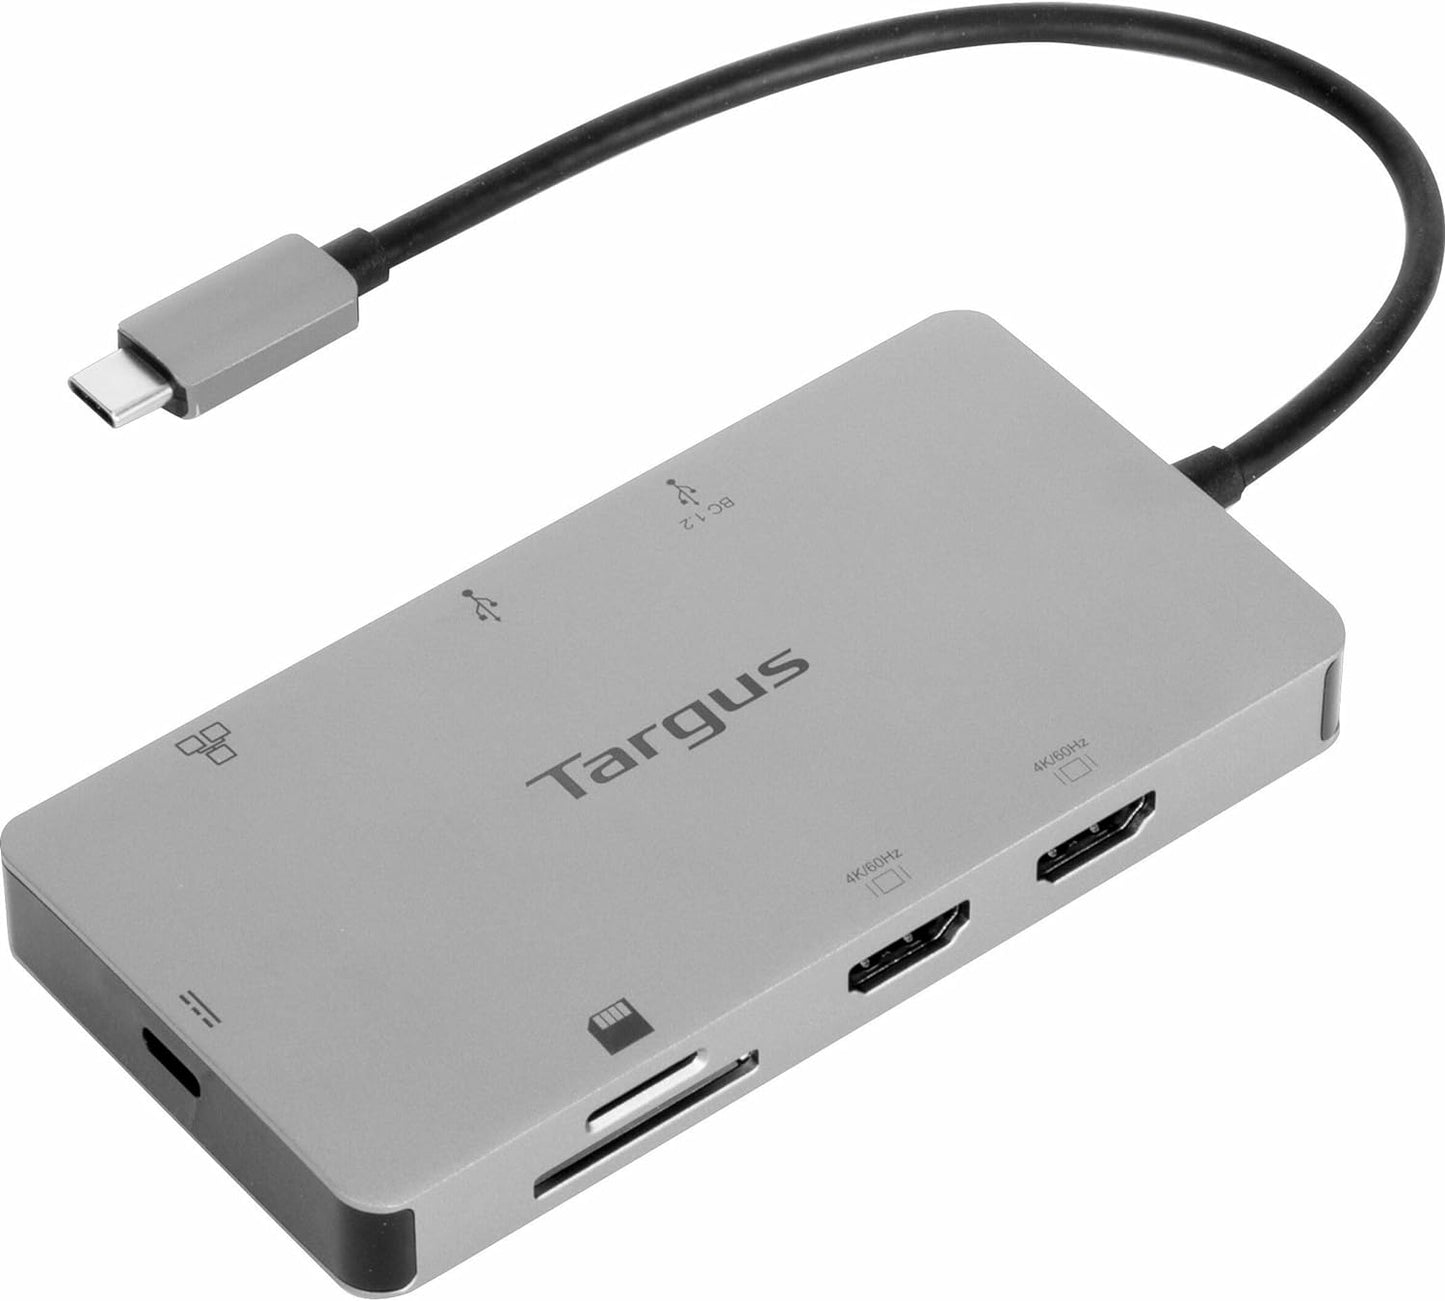 Targus USB-C Dual HDMI 4K Docking Station with 100W PD Pass-Thru - Expand Your HDMI, USB, and Ethernet Connections On-The-Go (DOCK423TT)